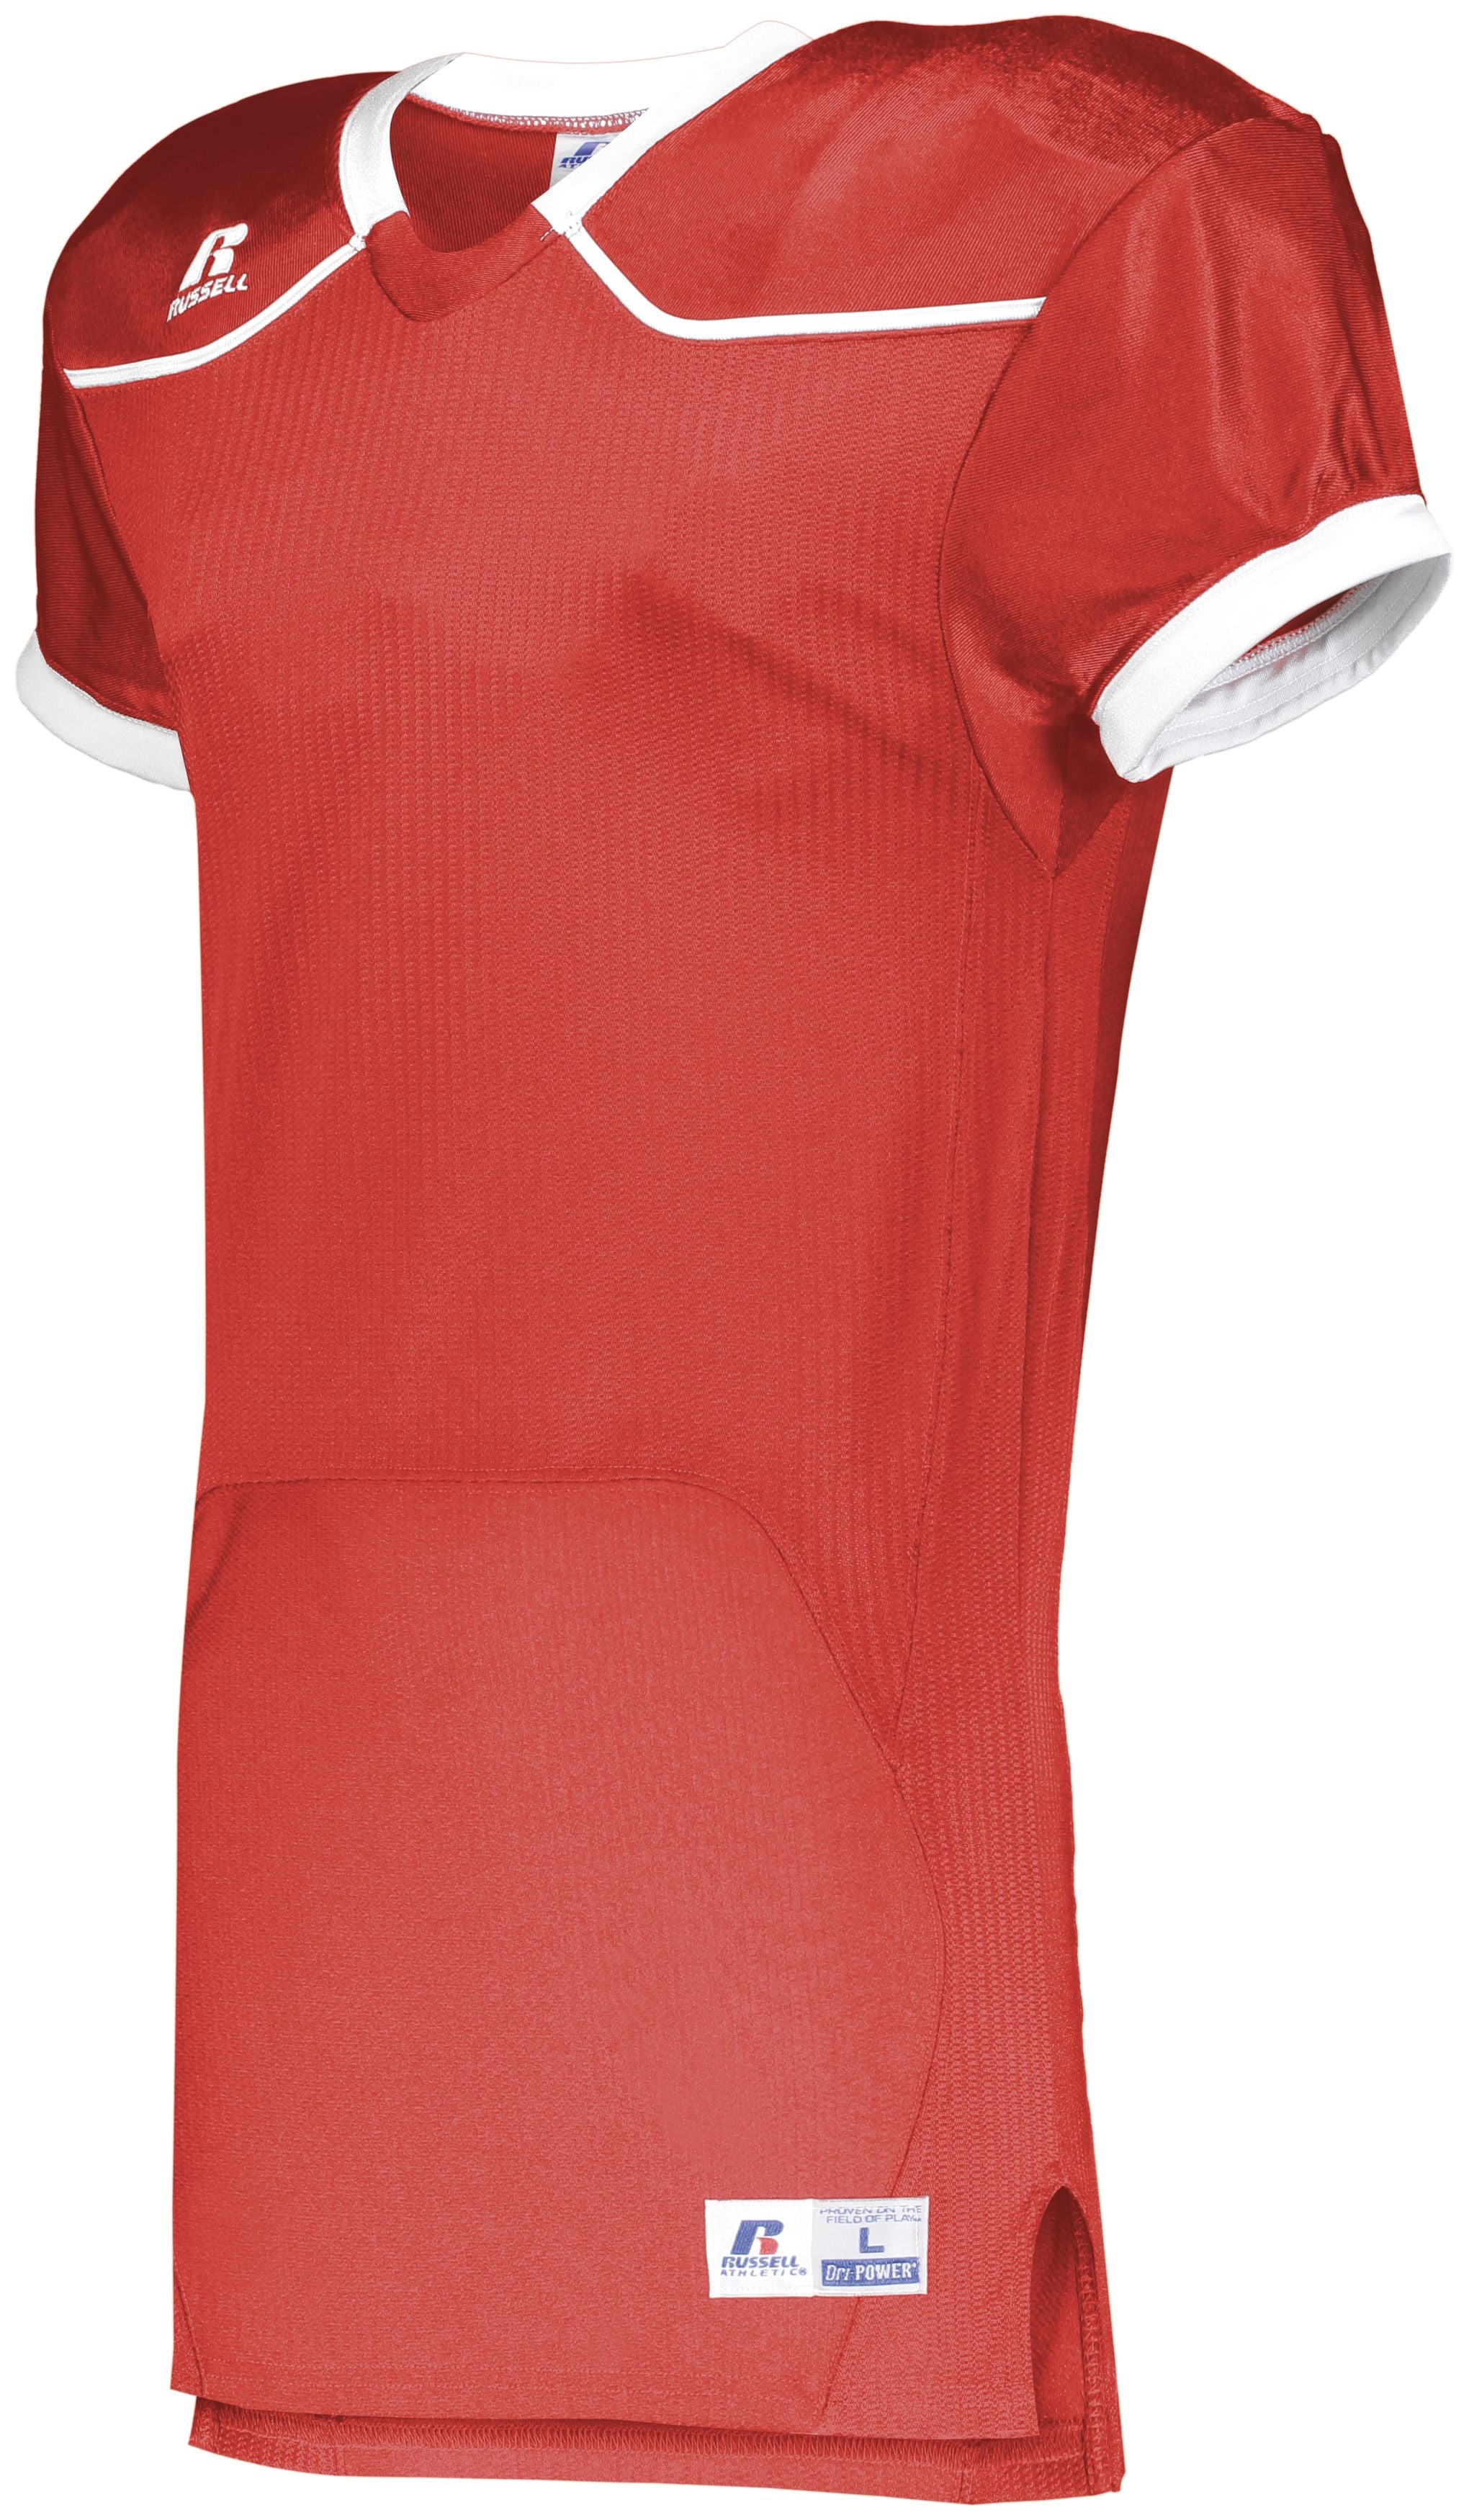 Russell Athletic Color Block Game Jersey (Home) in True Red/White  -Part of the Adult, Adult-Jersey, Football, Russell-Athletic-Products, Shirts, All-Sports, All-Sports-1 product lines at KanaleyCreations.com